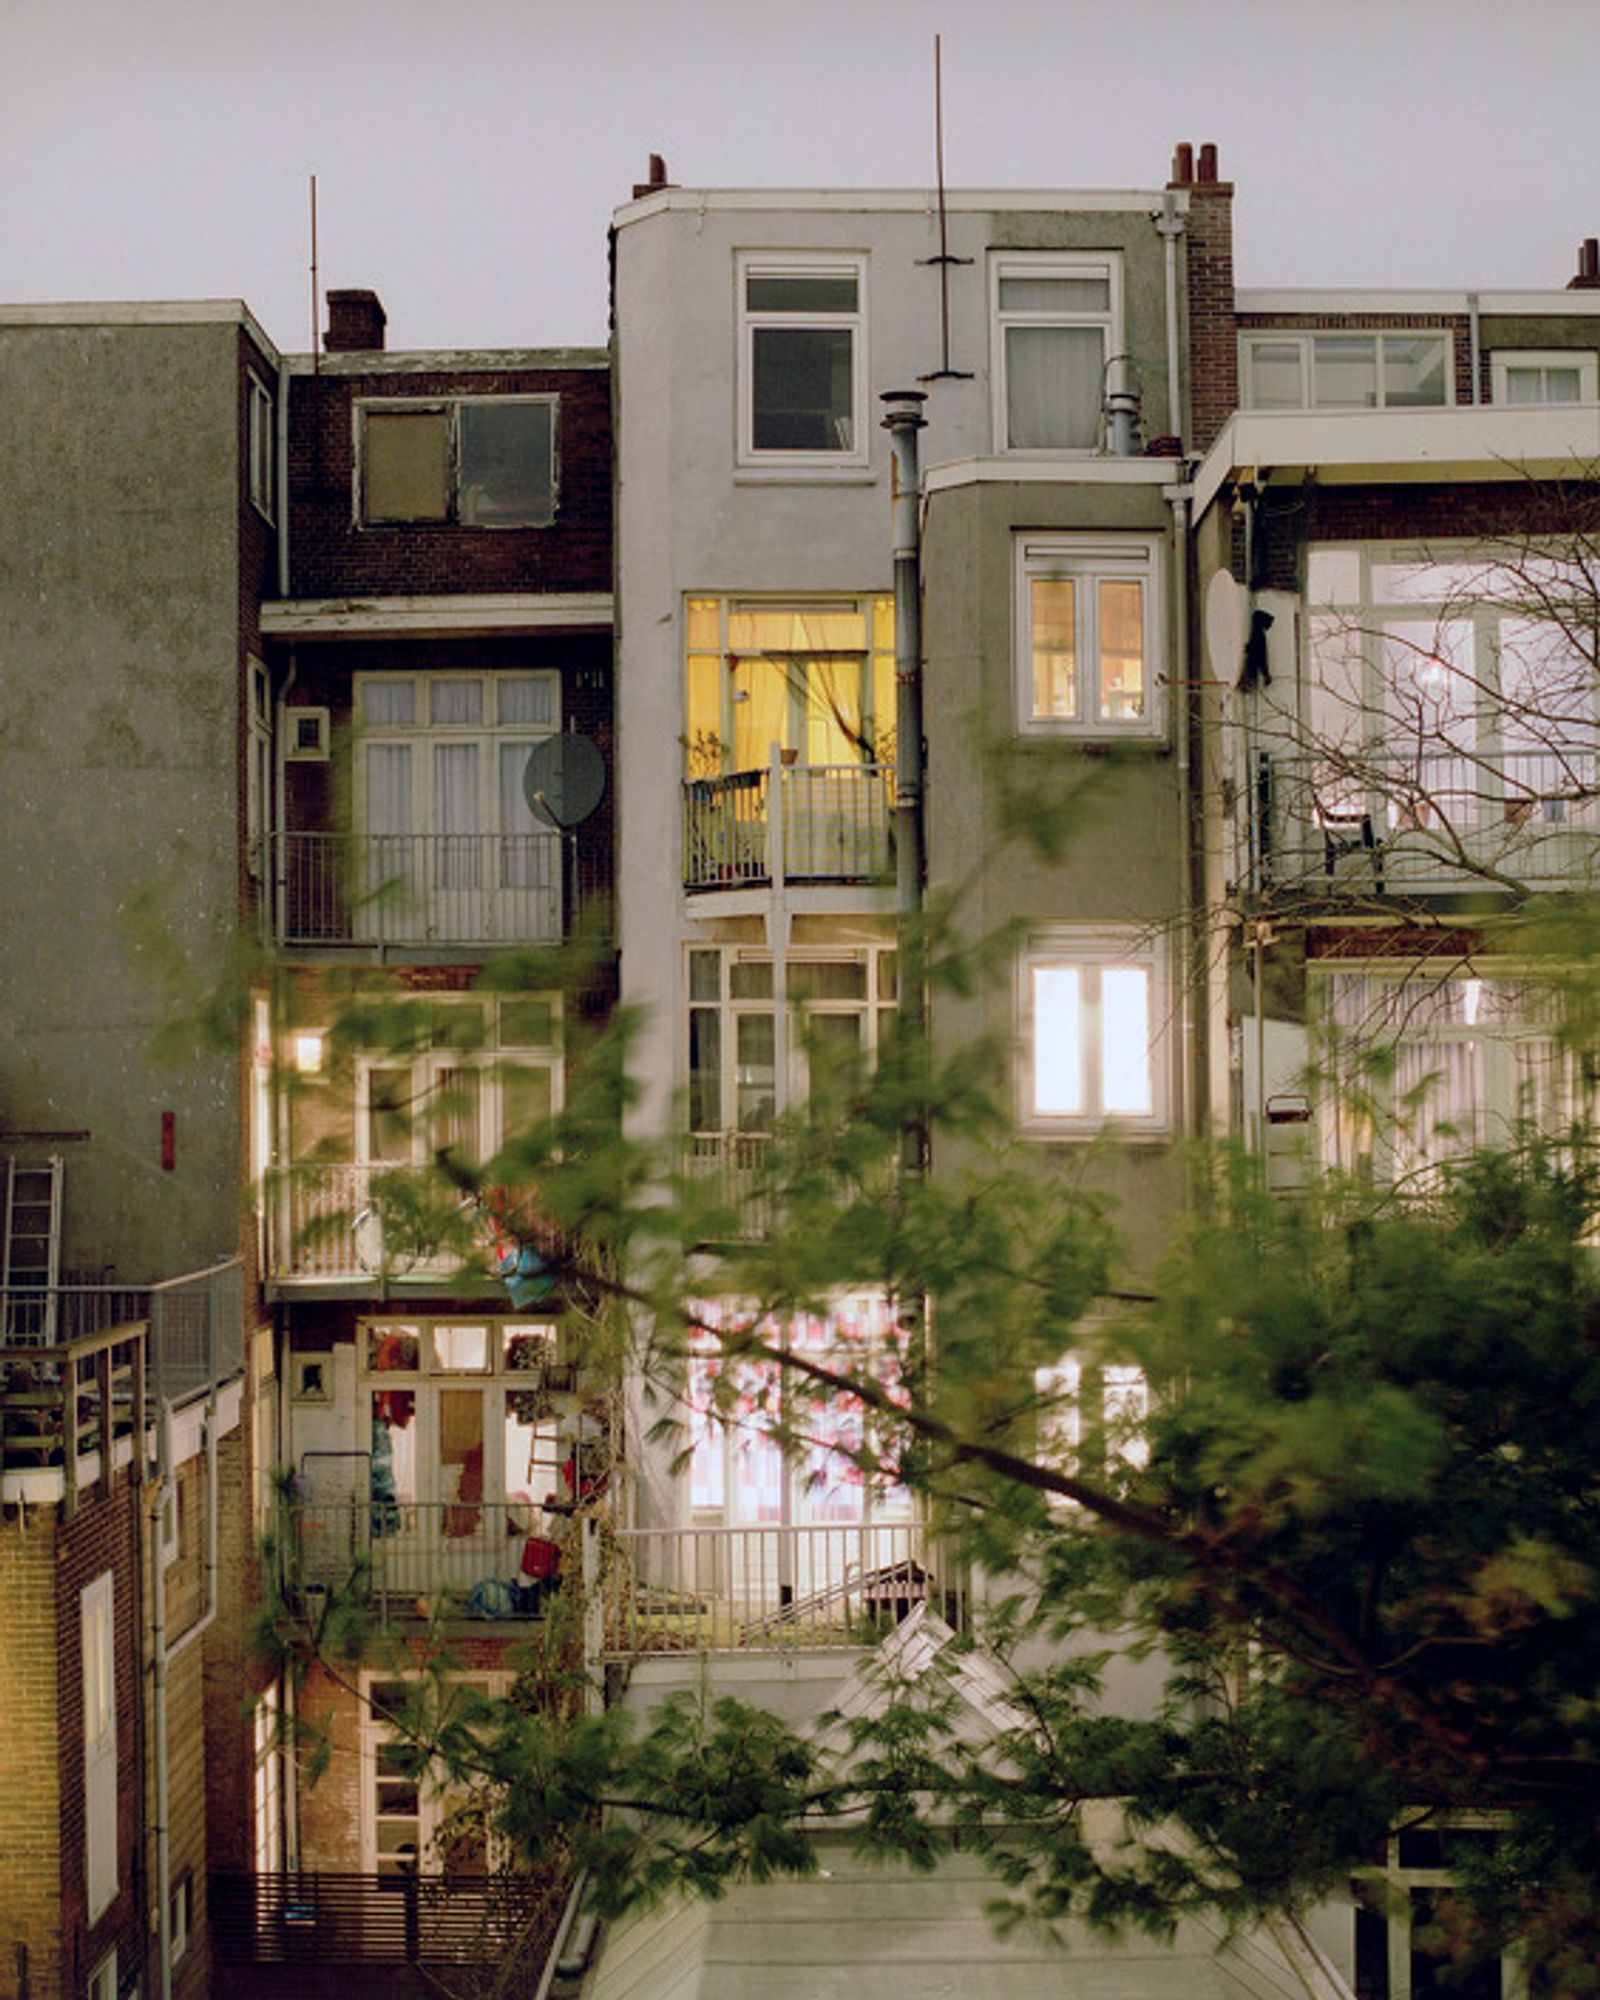 © Jordi Huisman - Image from the Rear Window photography project